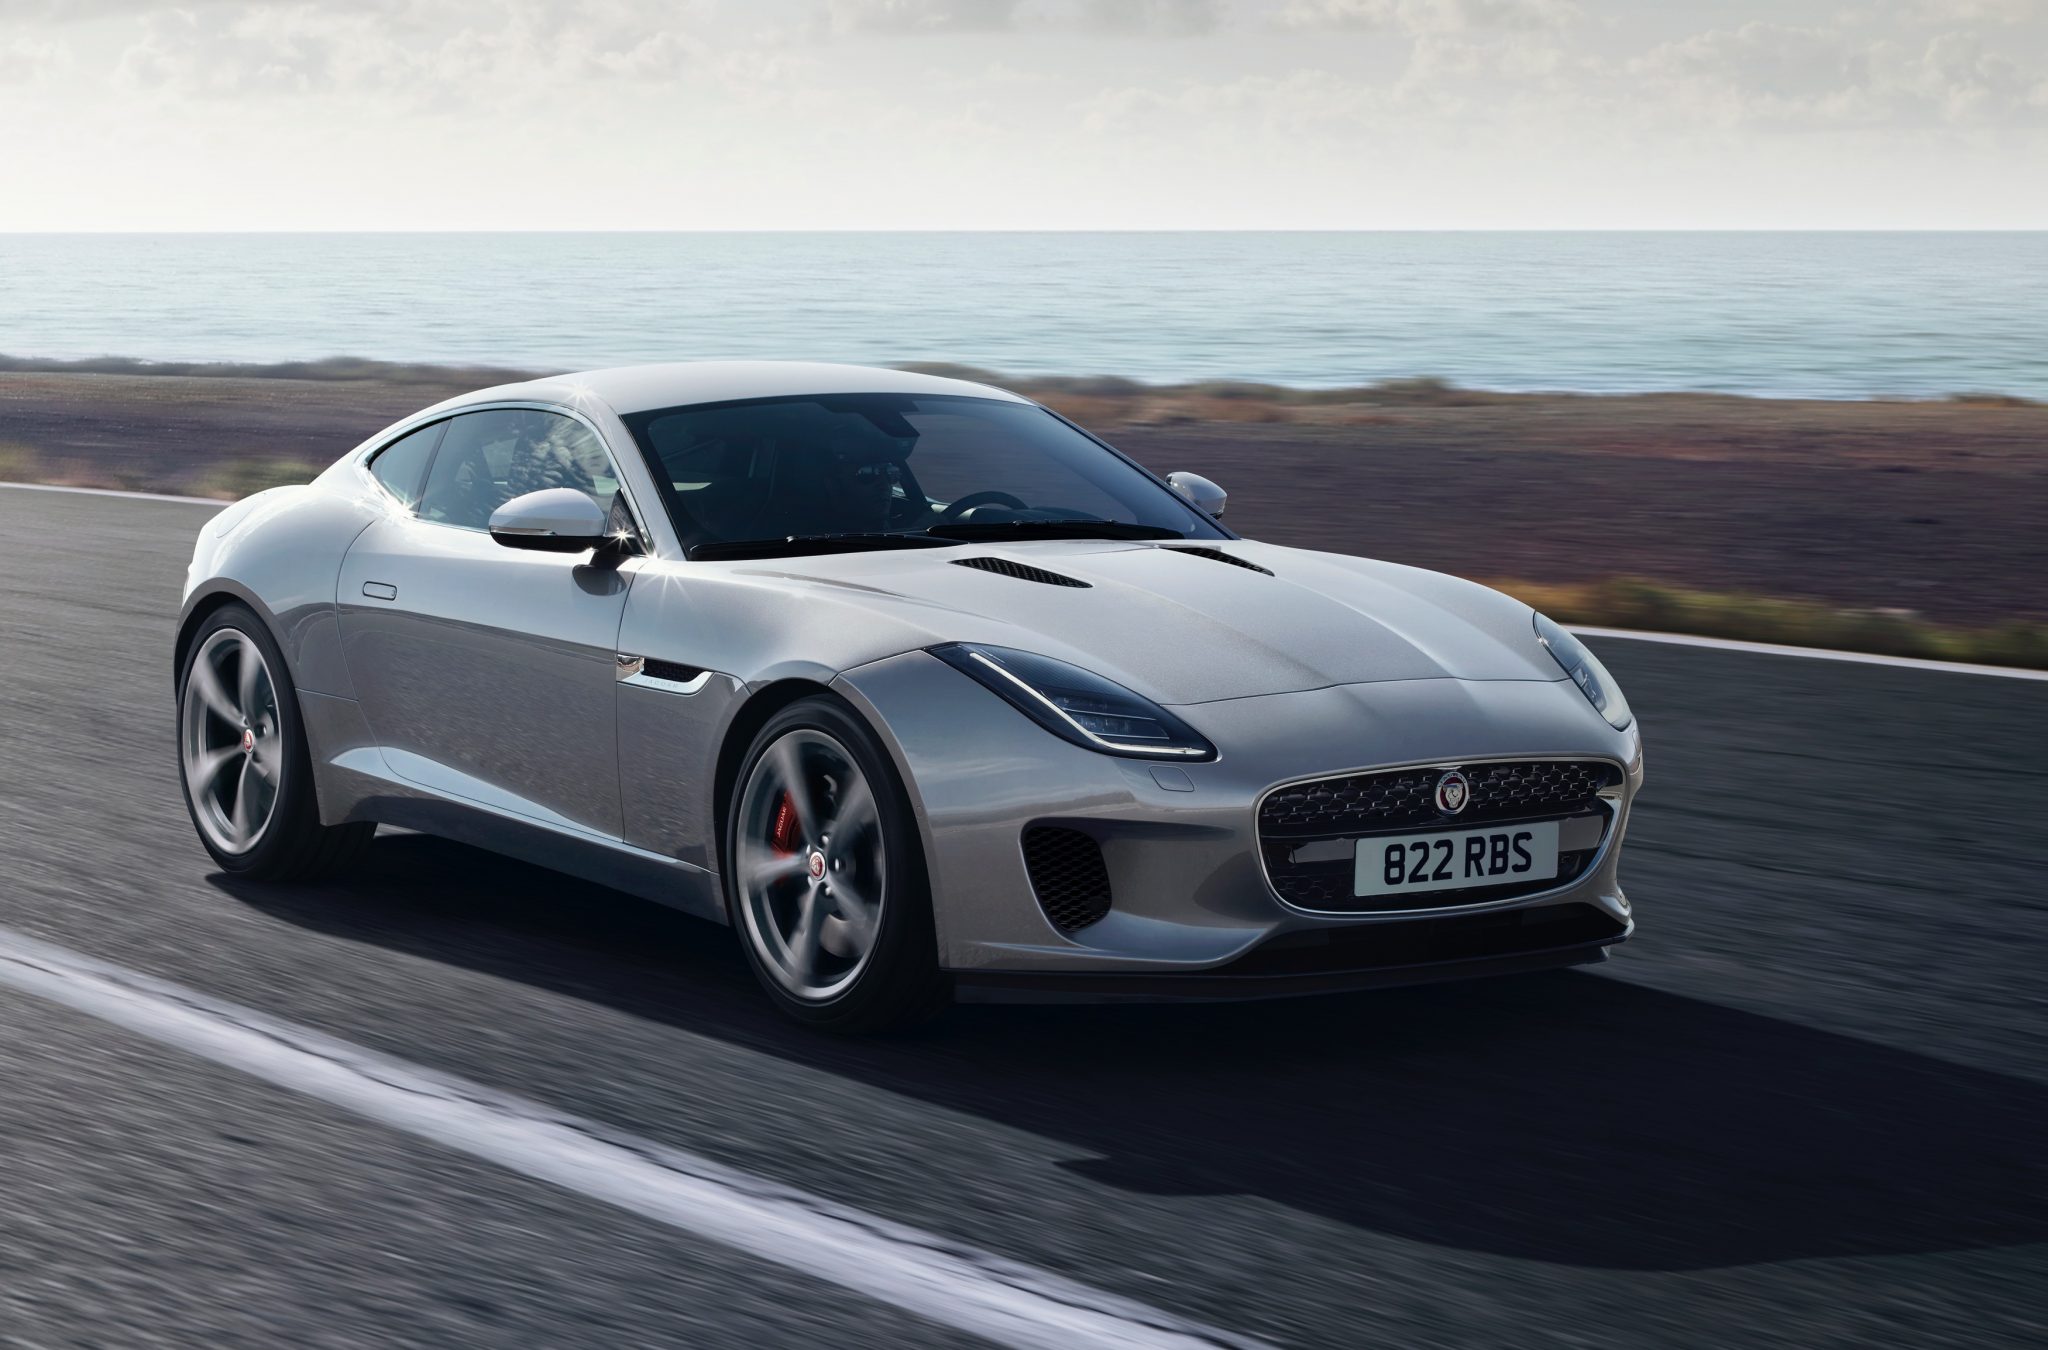 Jaguar F-Type Coupe Now Launched in Malaysia - Autofreaks.com